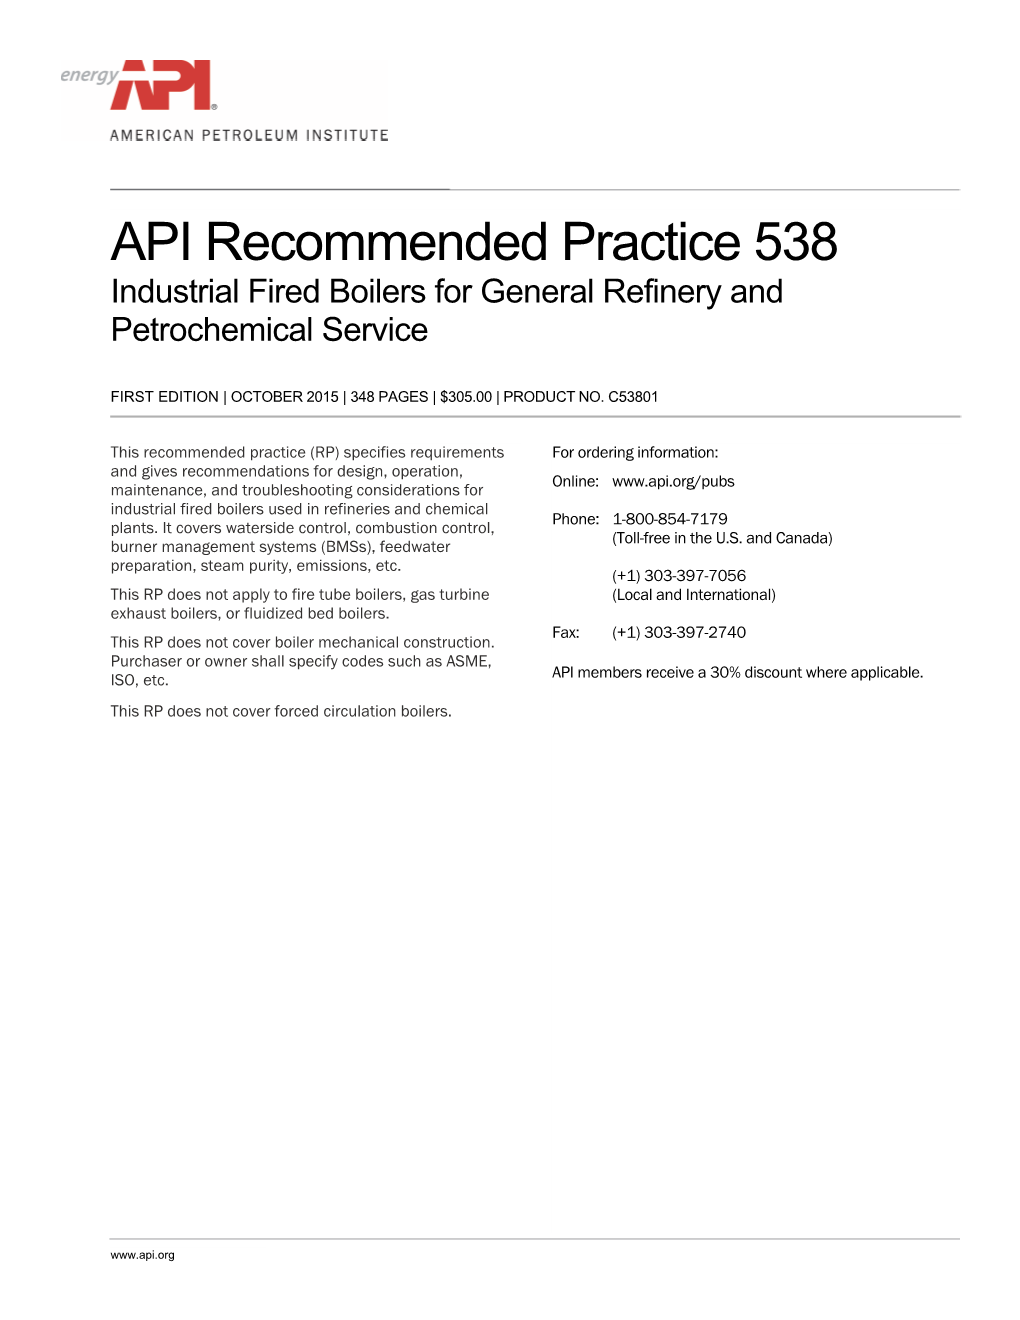 API Recommended Practice 538 Industrial Fired Boilers for General Refinery and Petrochemical Service